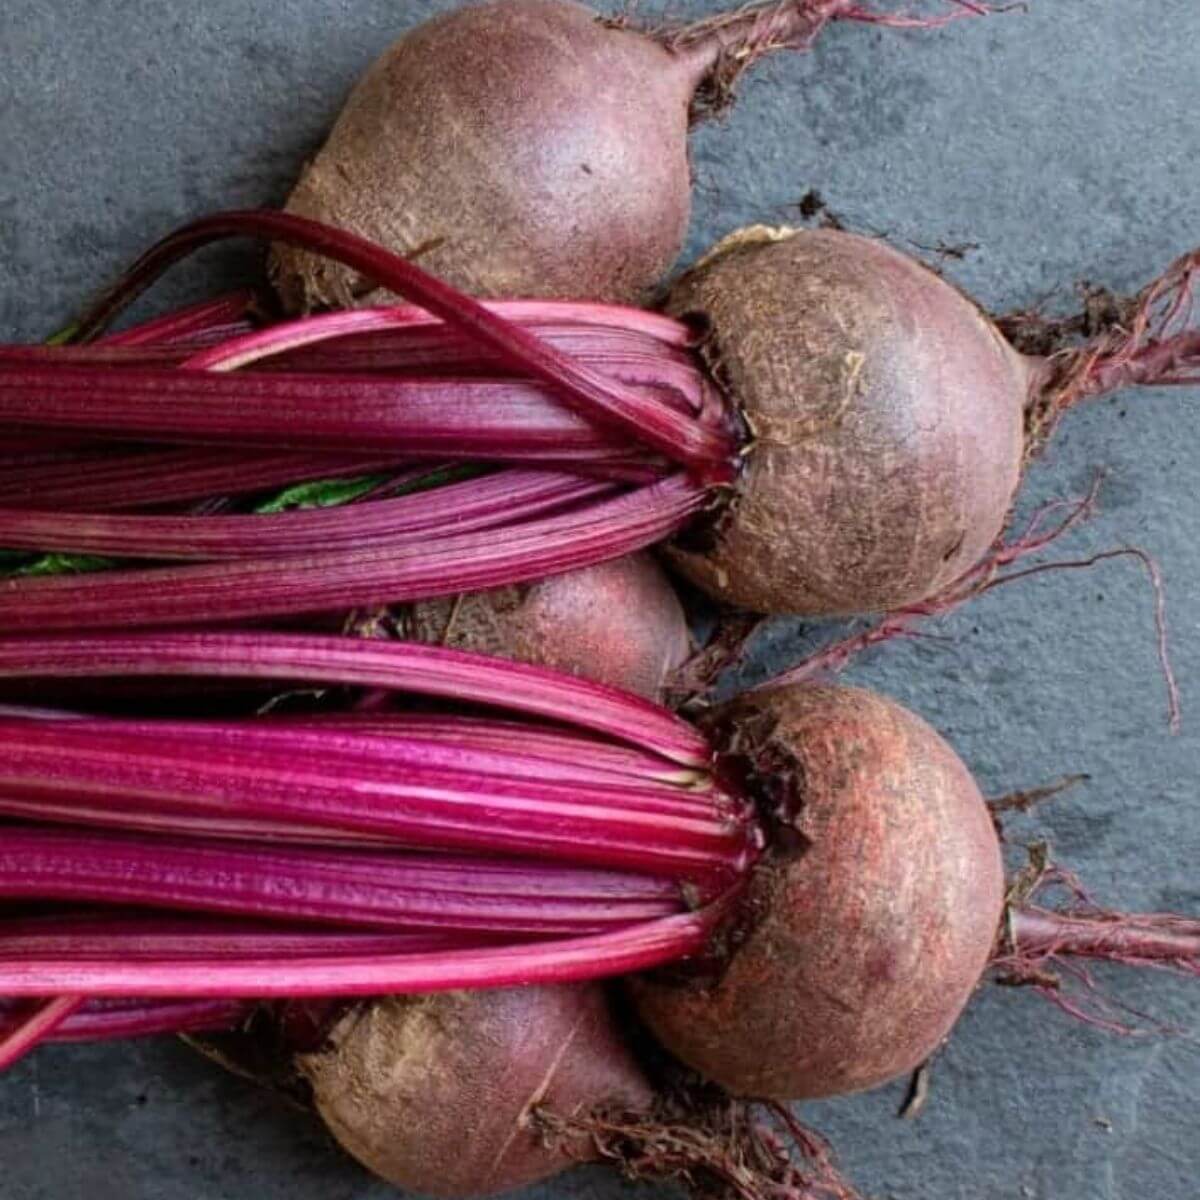 Health and beauty benefits of beets